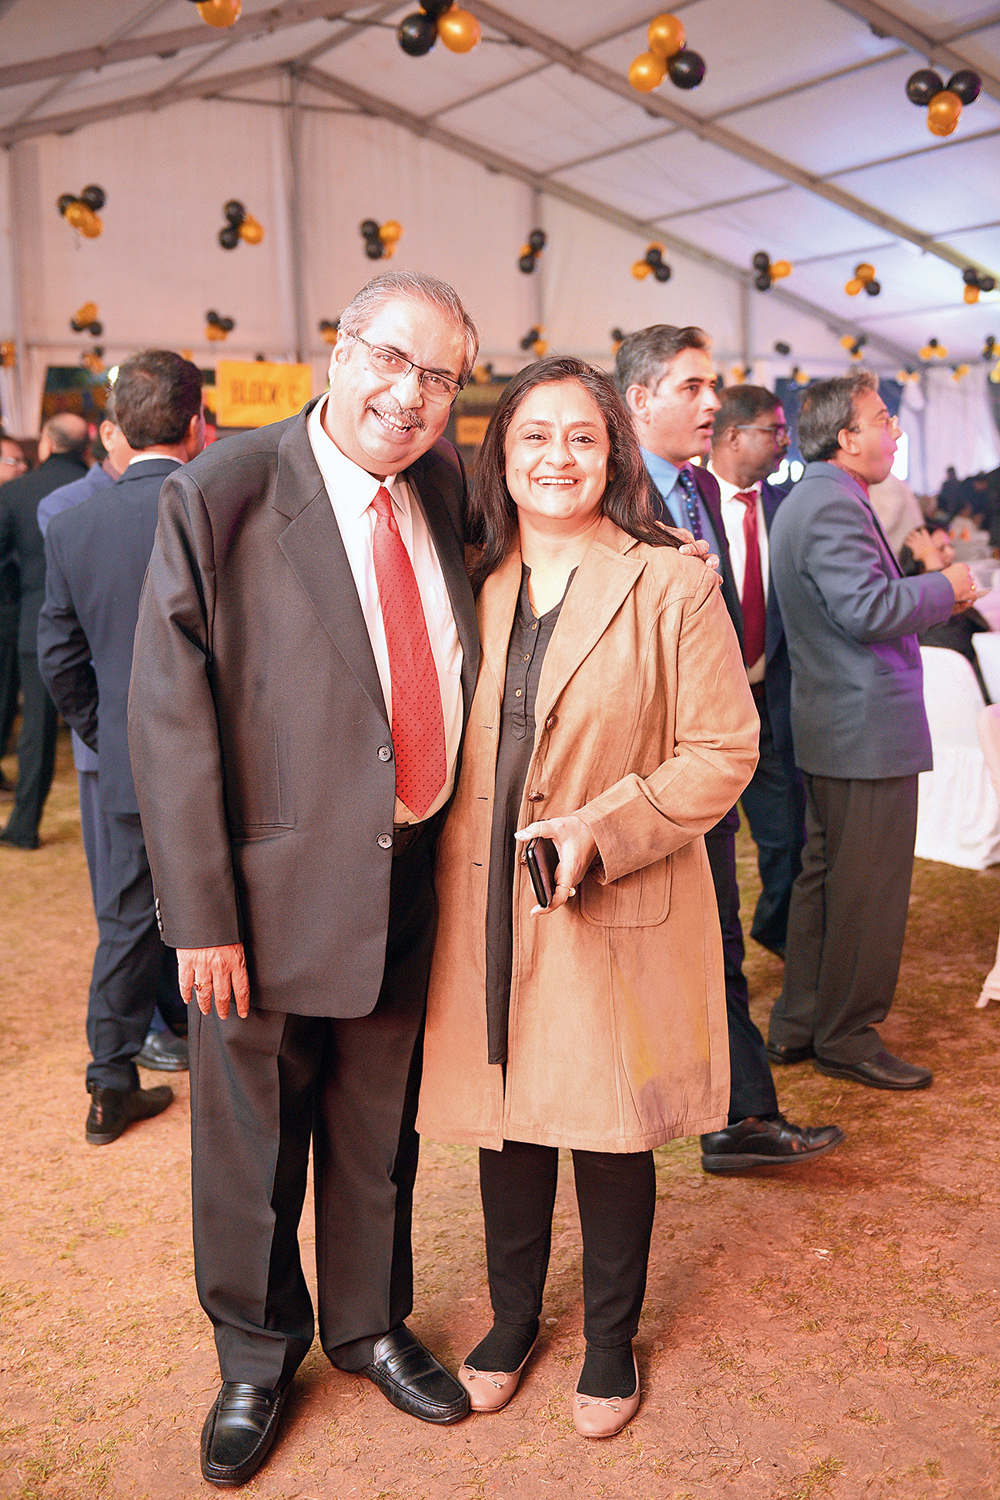 For some, spending NYE at the AJC Bose Road club is all about old times’ sake! “We are members of the club since the early 90s — it’s like a second home to us. Had to usher in a new decade in a place that reeks of nostalgia, comfort and happiness,” said Ronita Dey, as she posed with husband Sanjoy